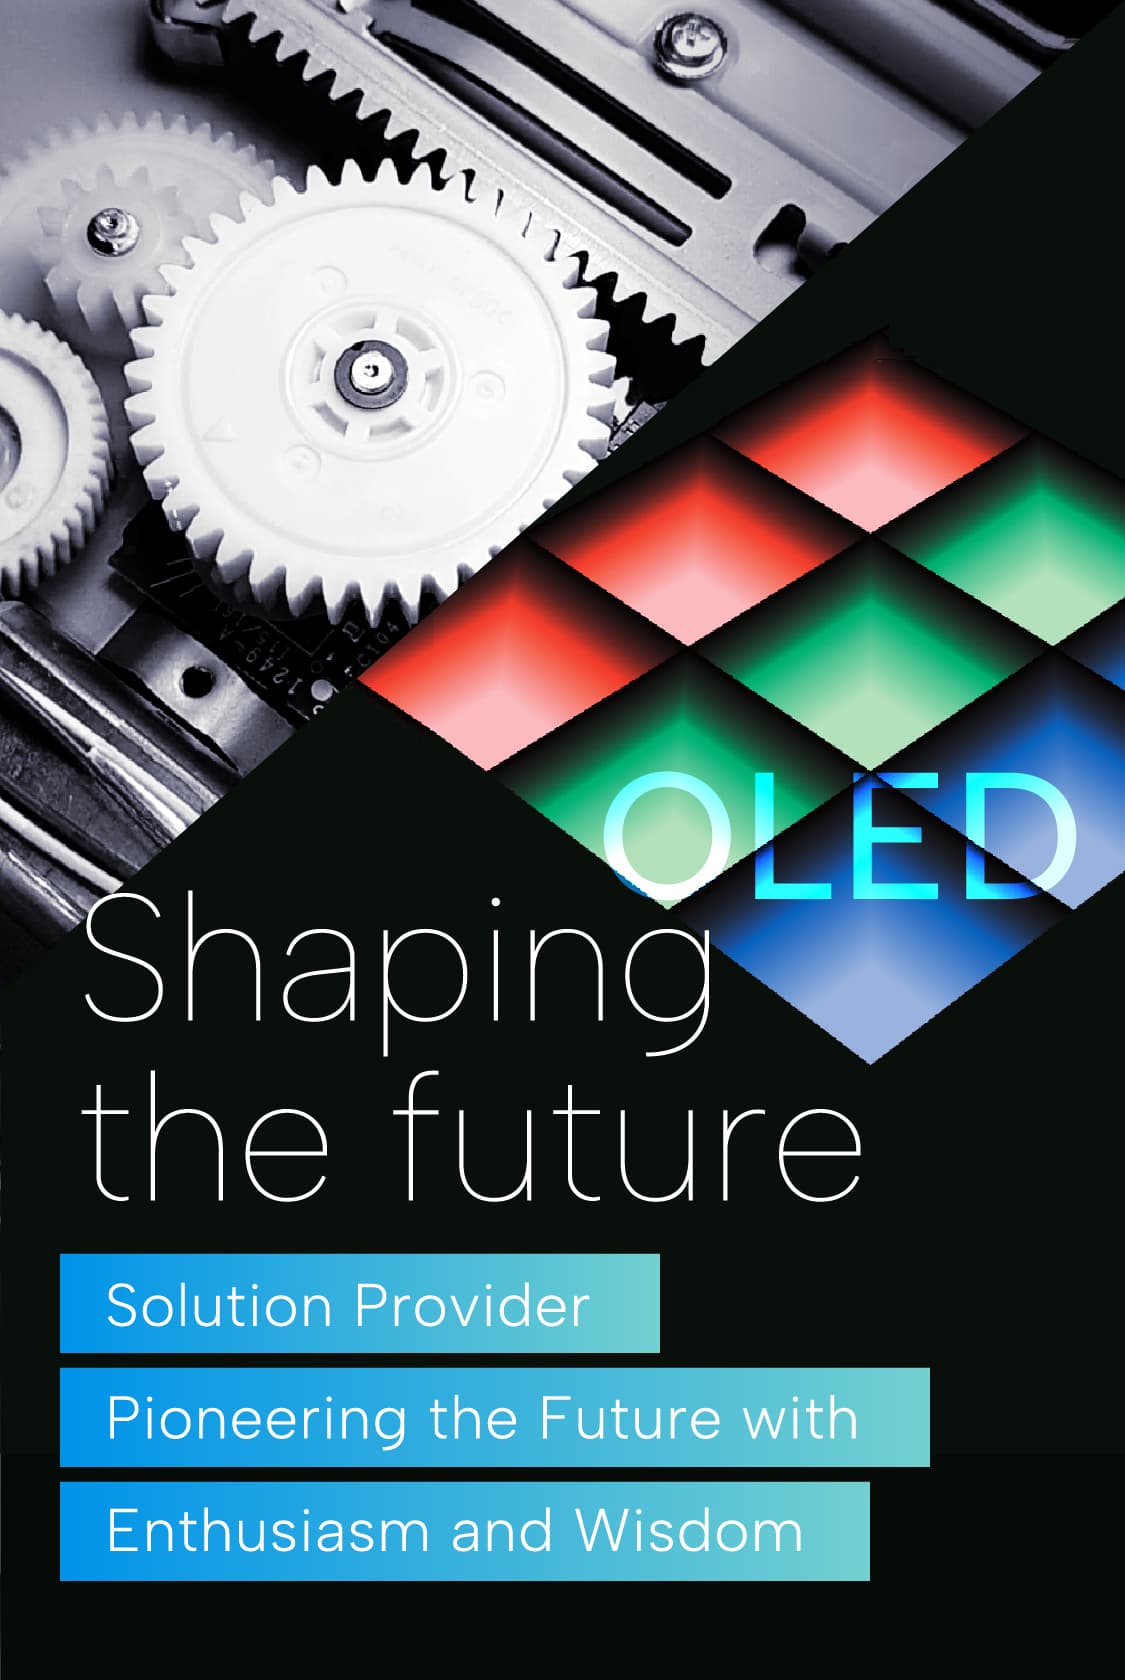 Solution Provider Pioneering the Future with Enthusiasm and Wisdom